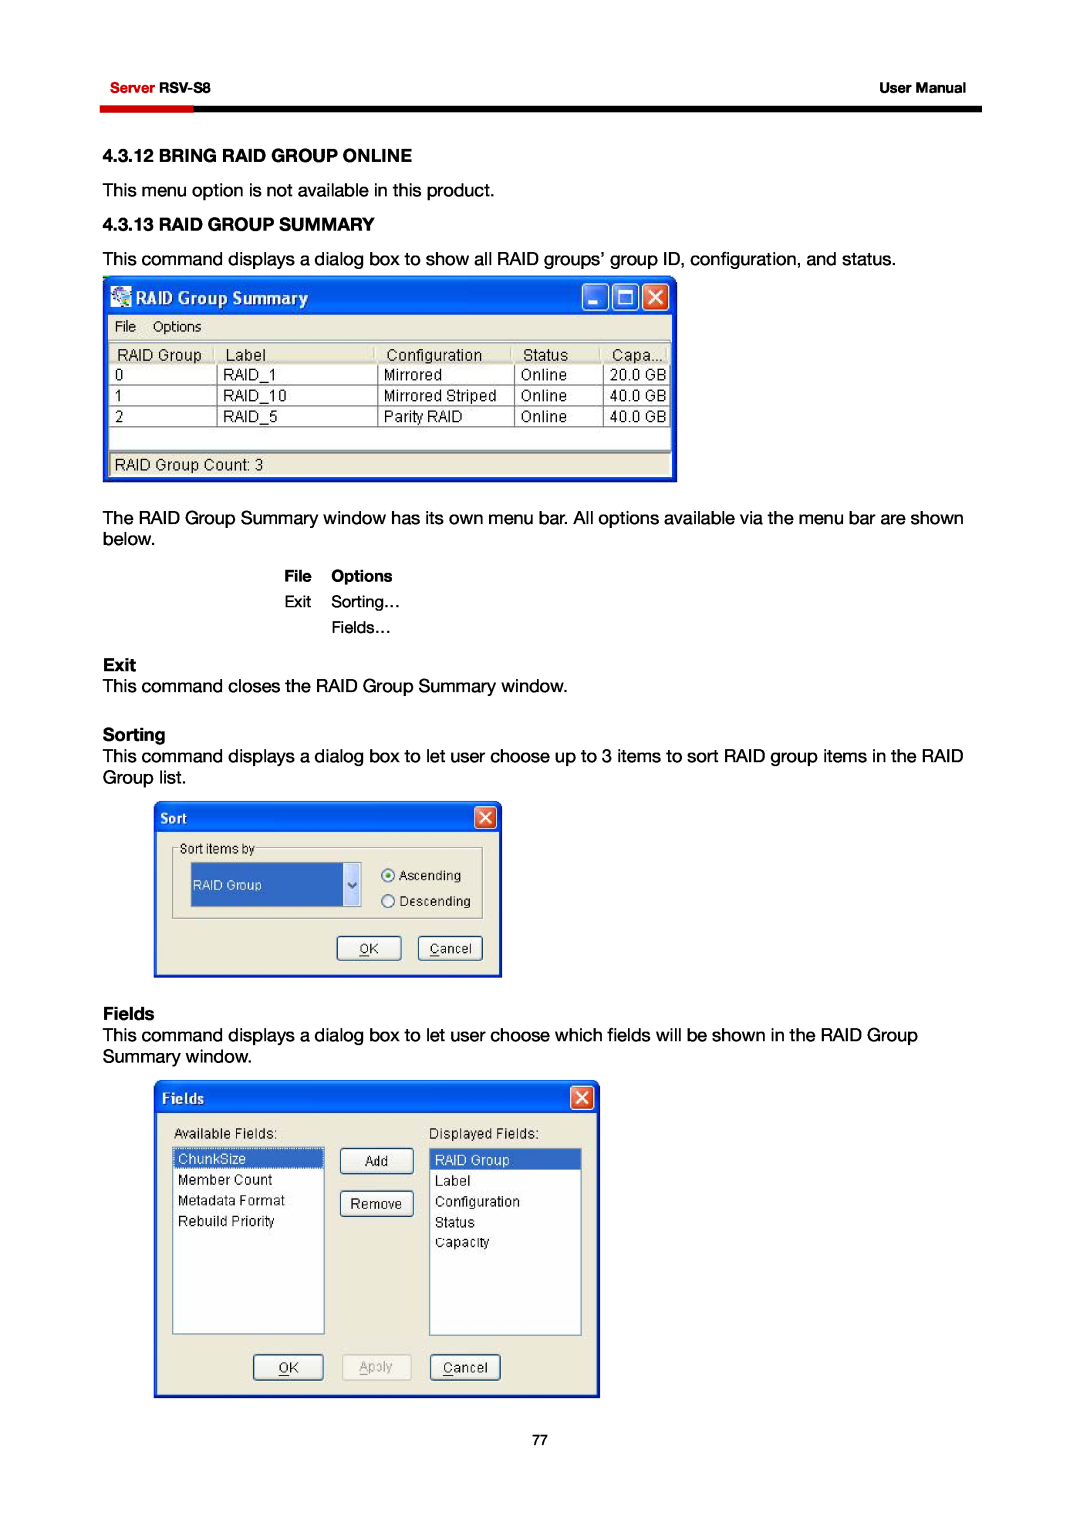 Rosewill RSV-S8 user manual Bring Raid Group Online, Raid Group Summary, Exit, Sorting, Fields 